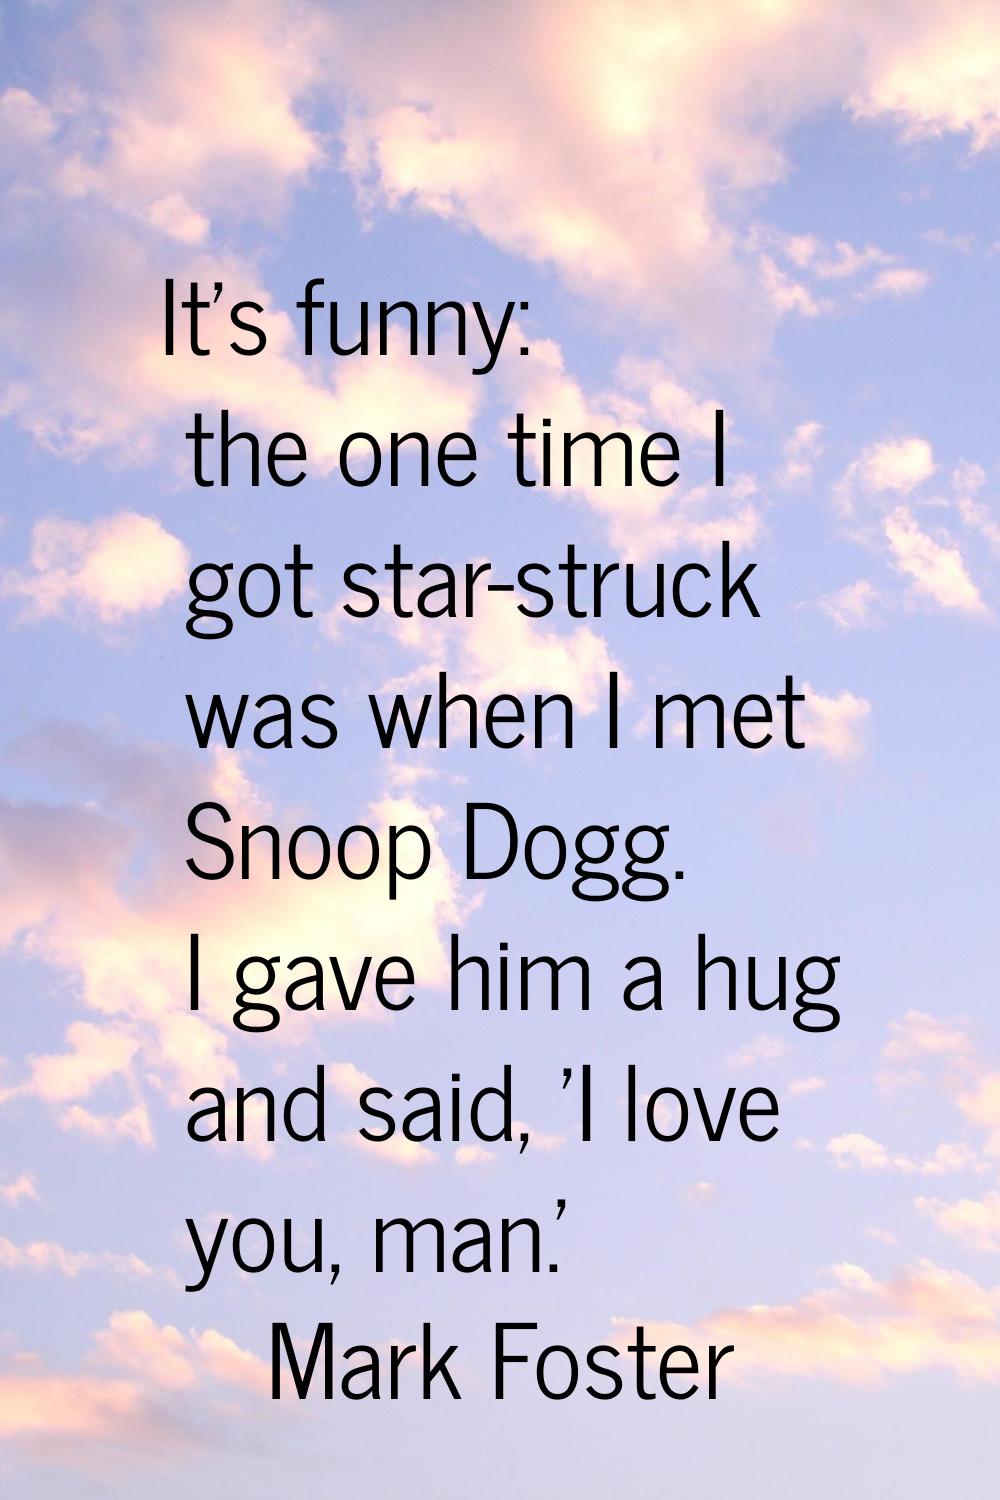 It's funny: the one time I got star-struck was when I met Snoop Dogg. I gave him a hug and said, 'I